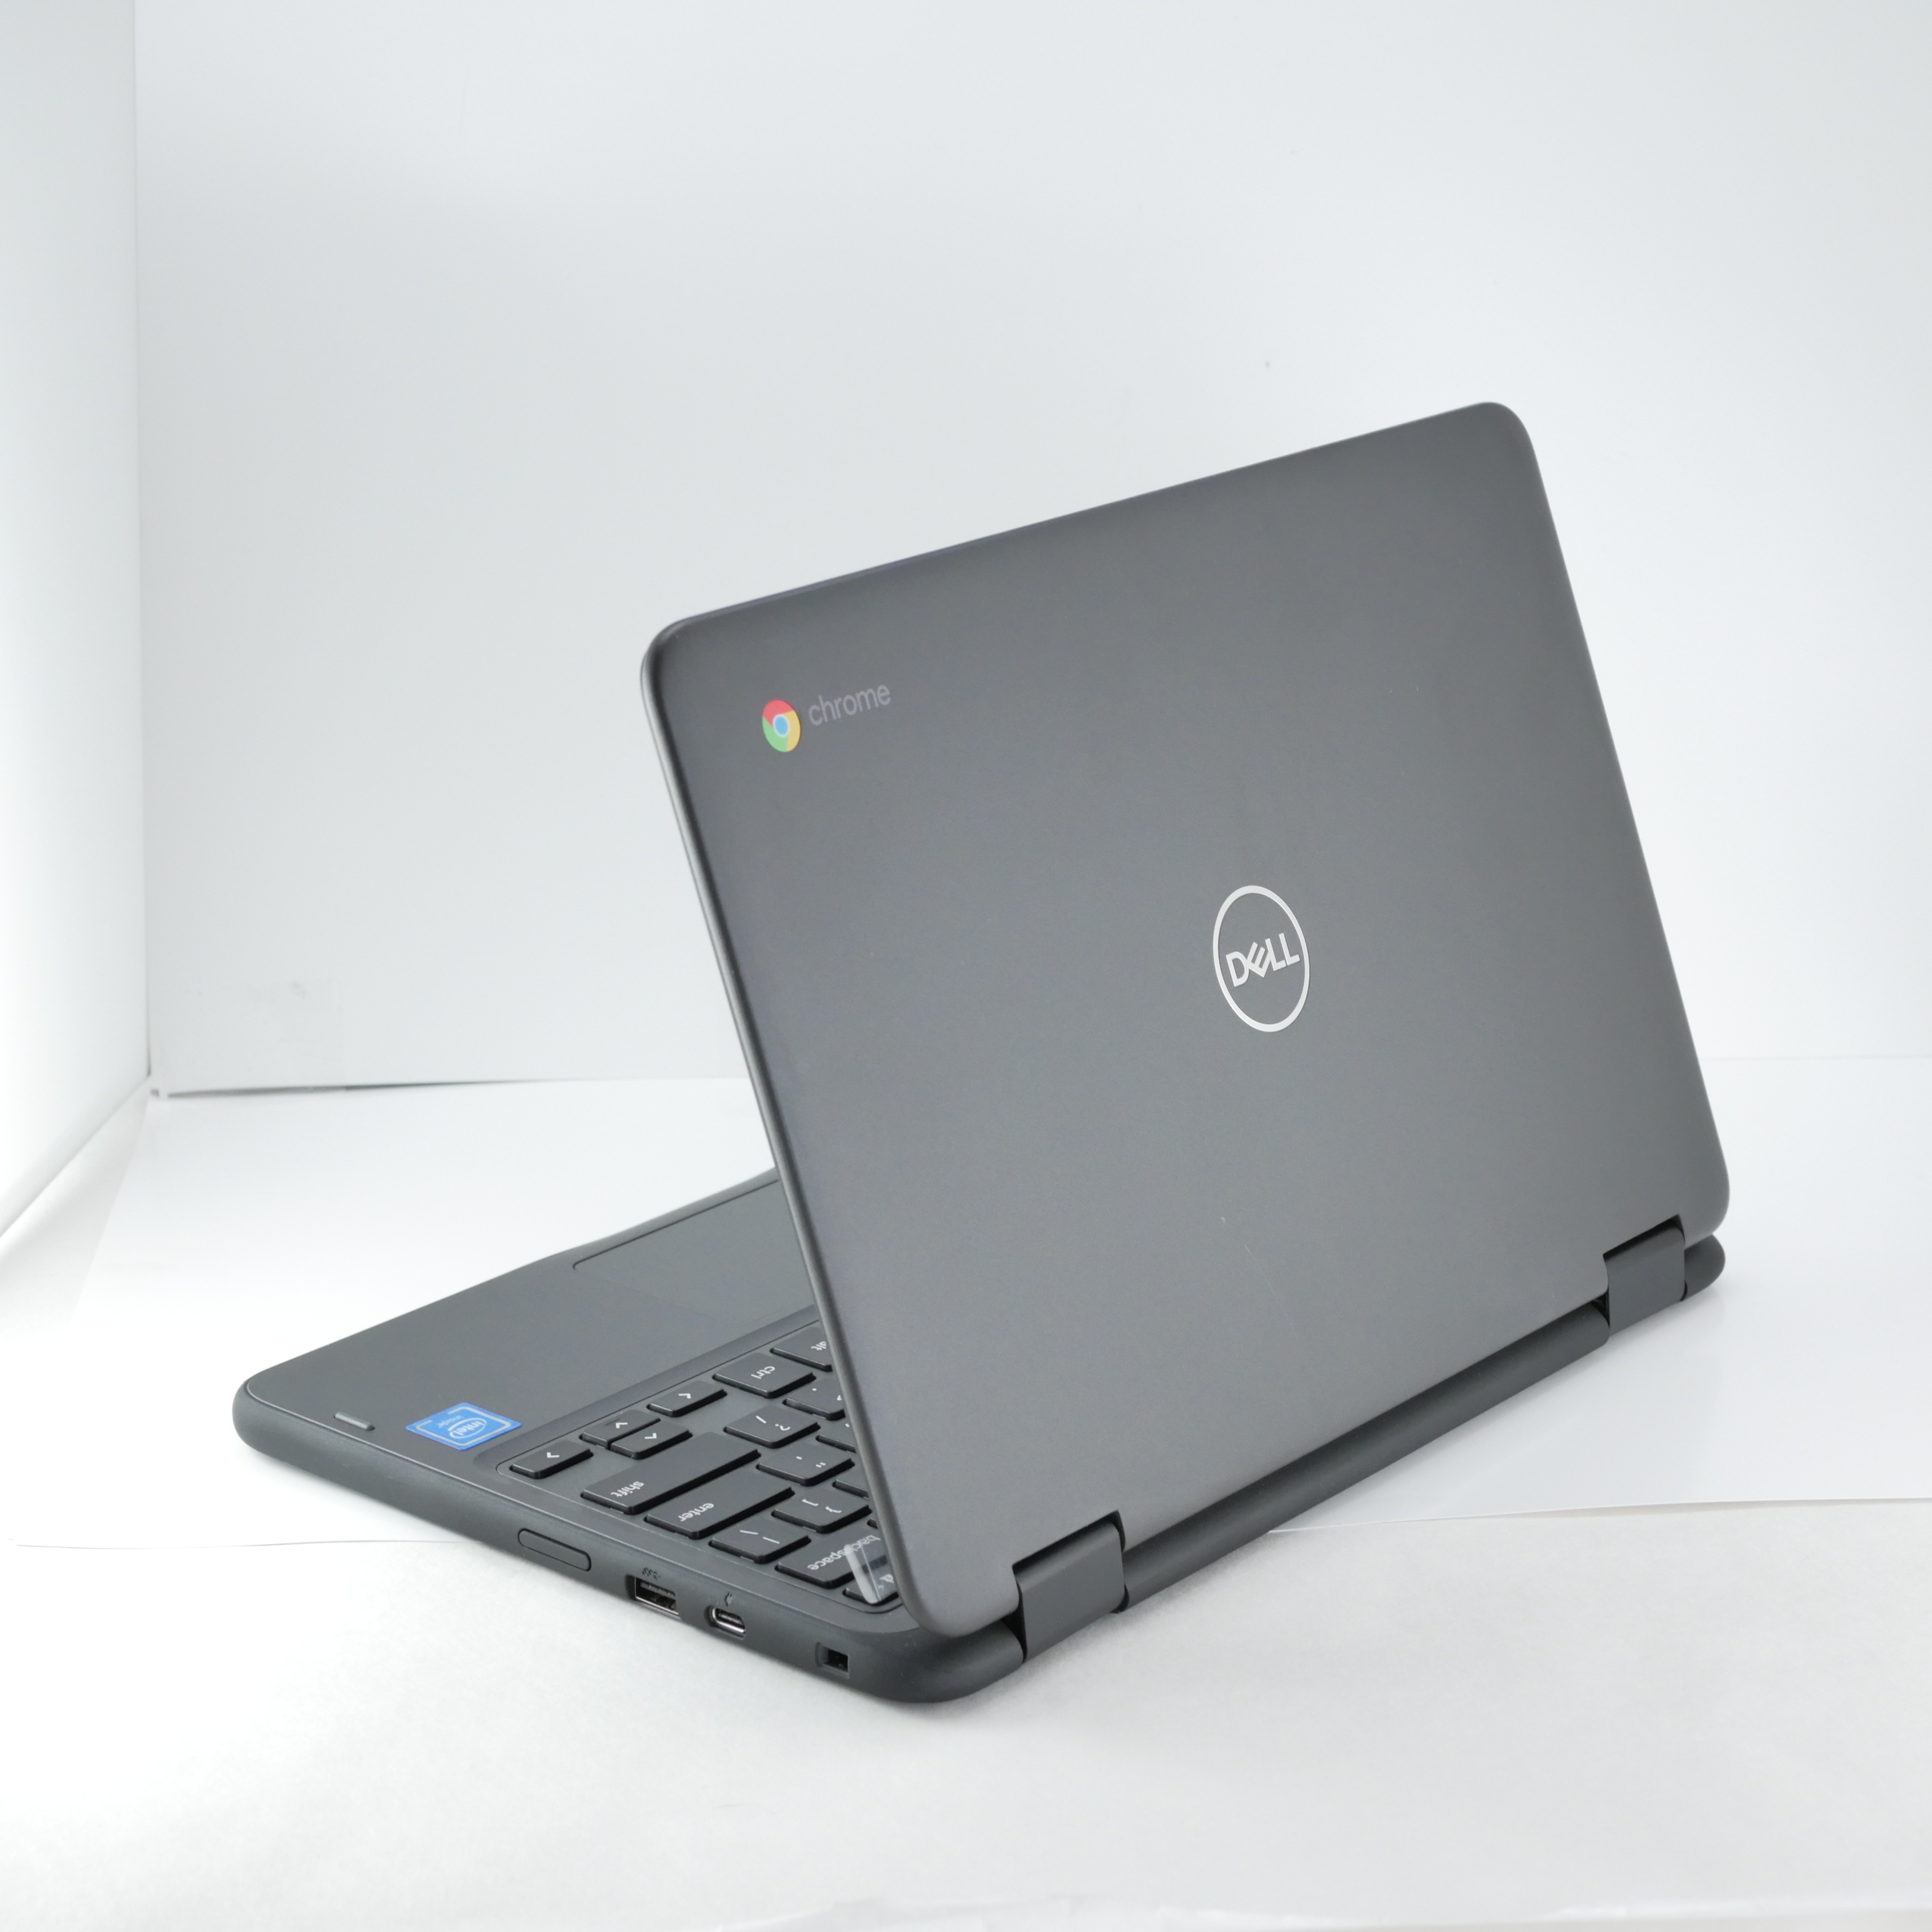 Dell Chromebook 3100 2-in-1 11.6" Celeron N4020 1.1 GHz 4Gb RAM 32GB SSD 9W43N - Click Image to Close